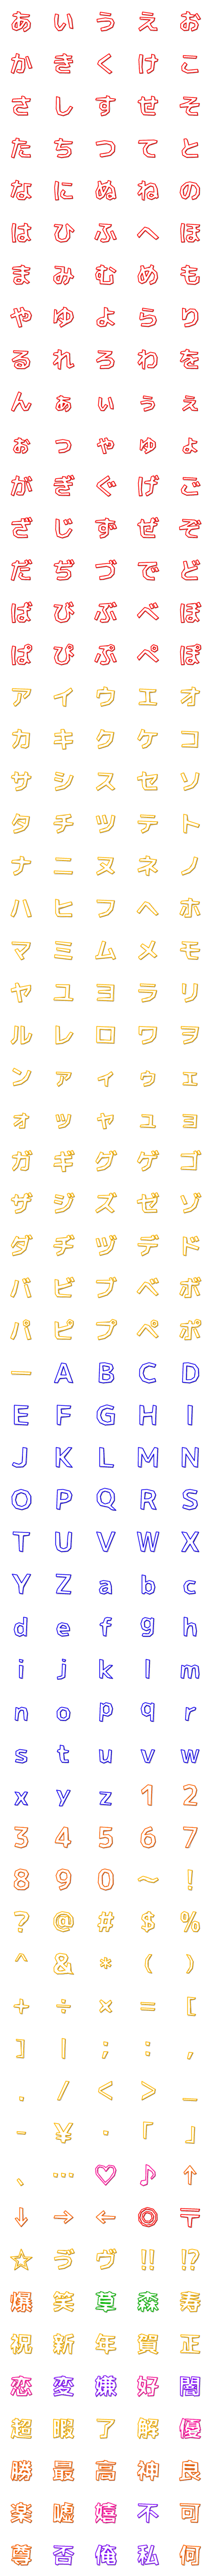 [LINE絵文字]子供のような文字の画像一覧